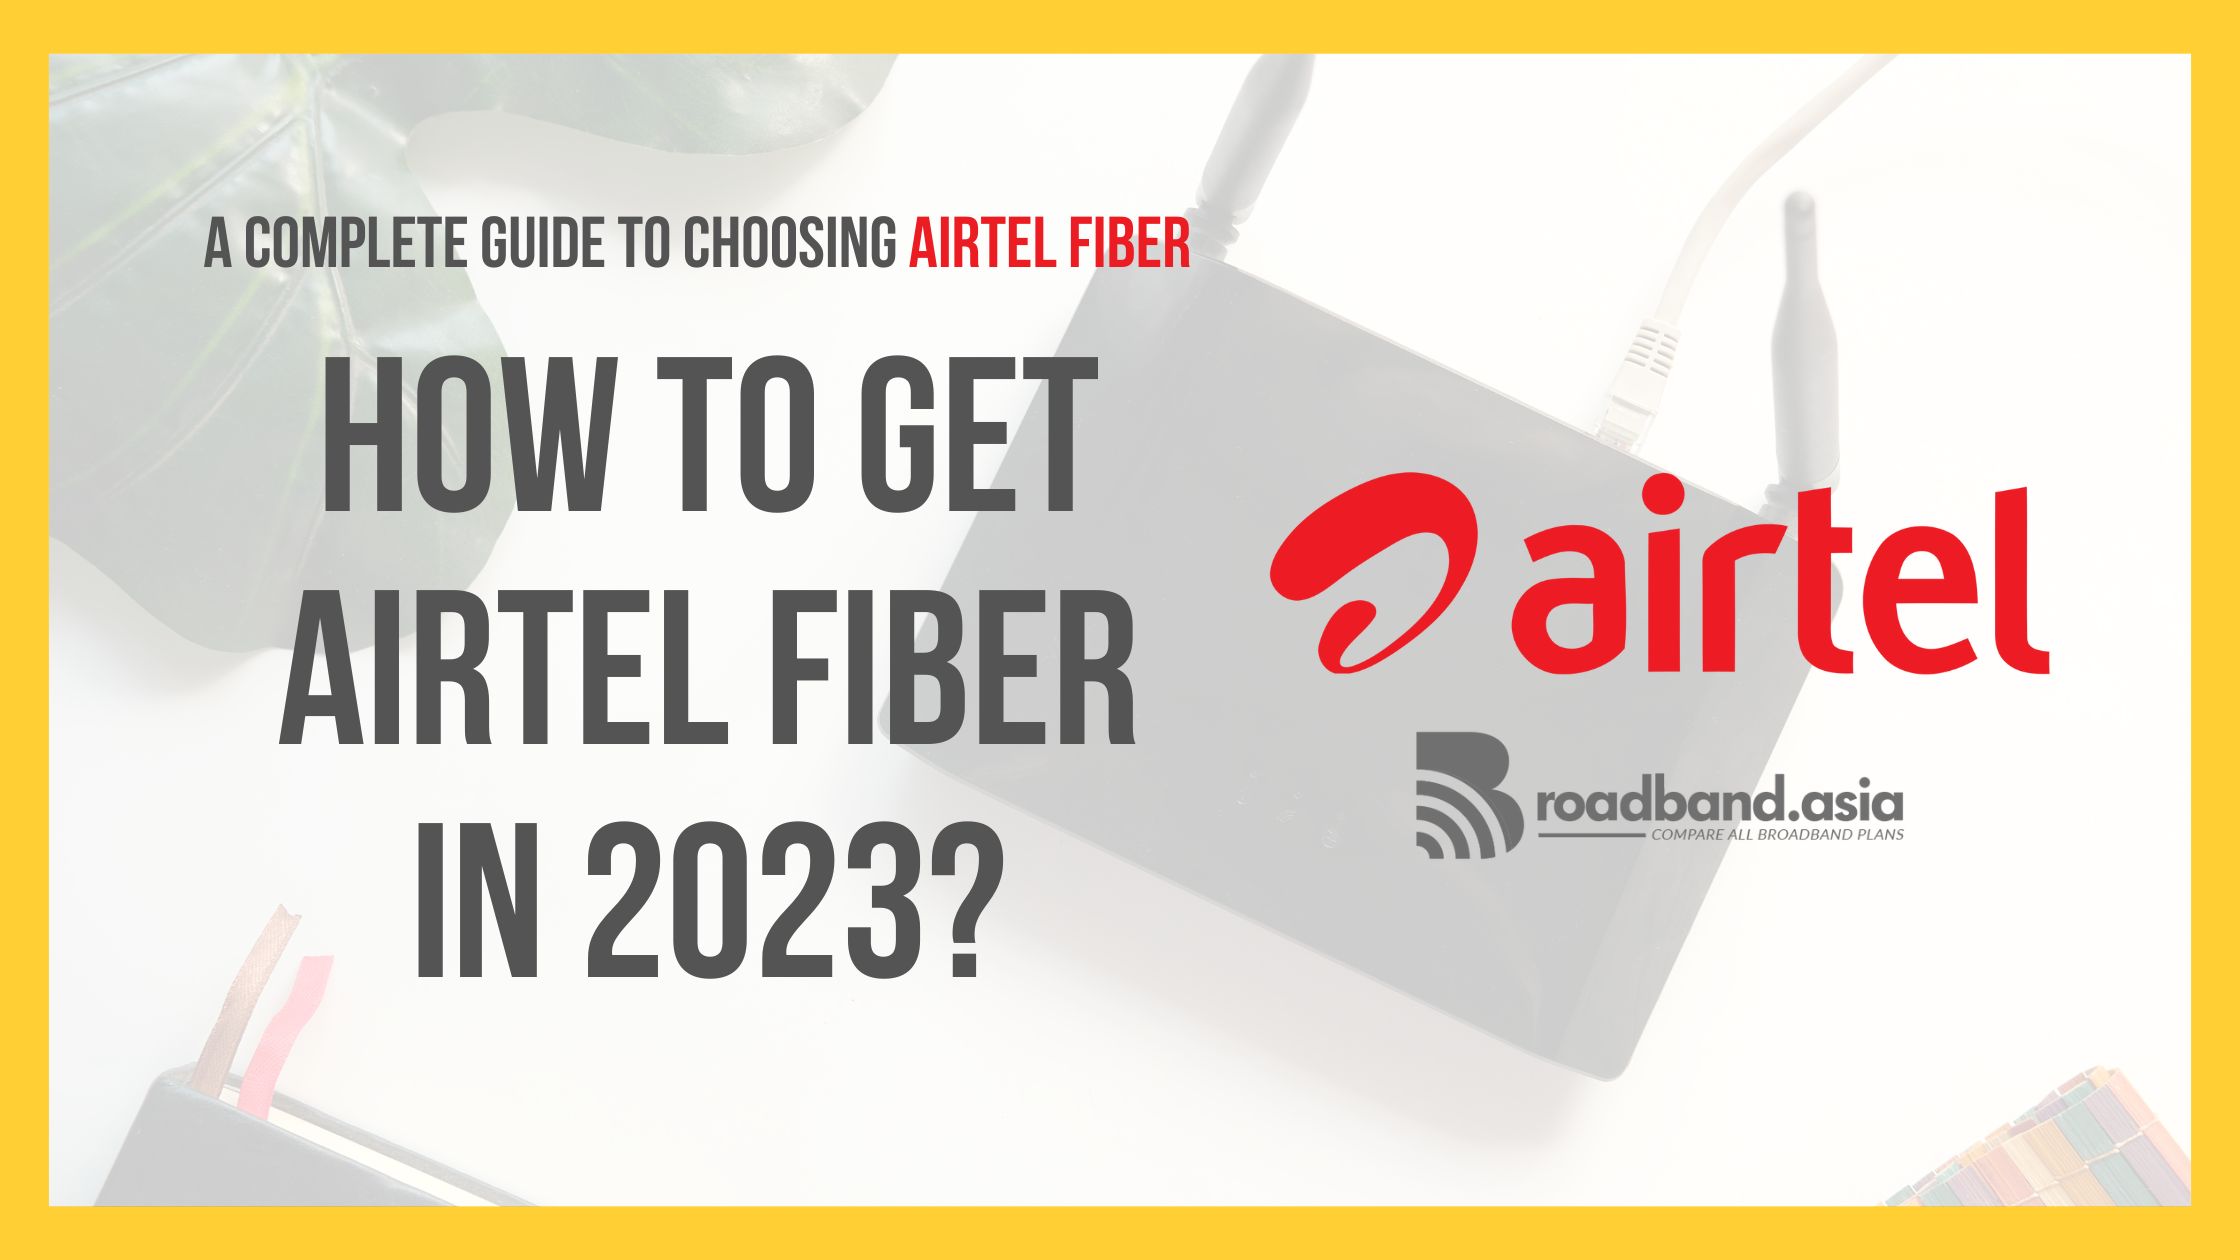 How to Get Airtel Fiber in 2023 with Broadband.Asia